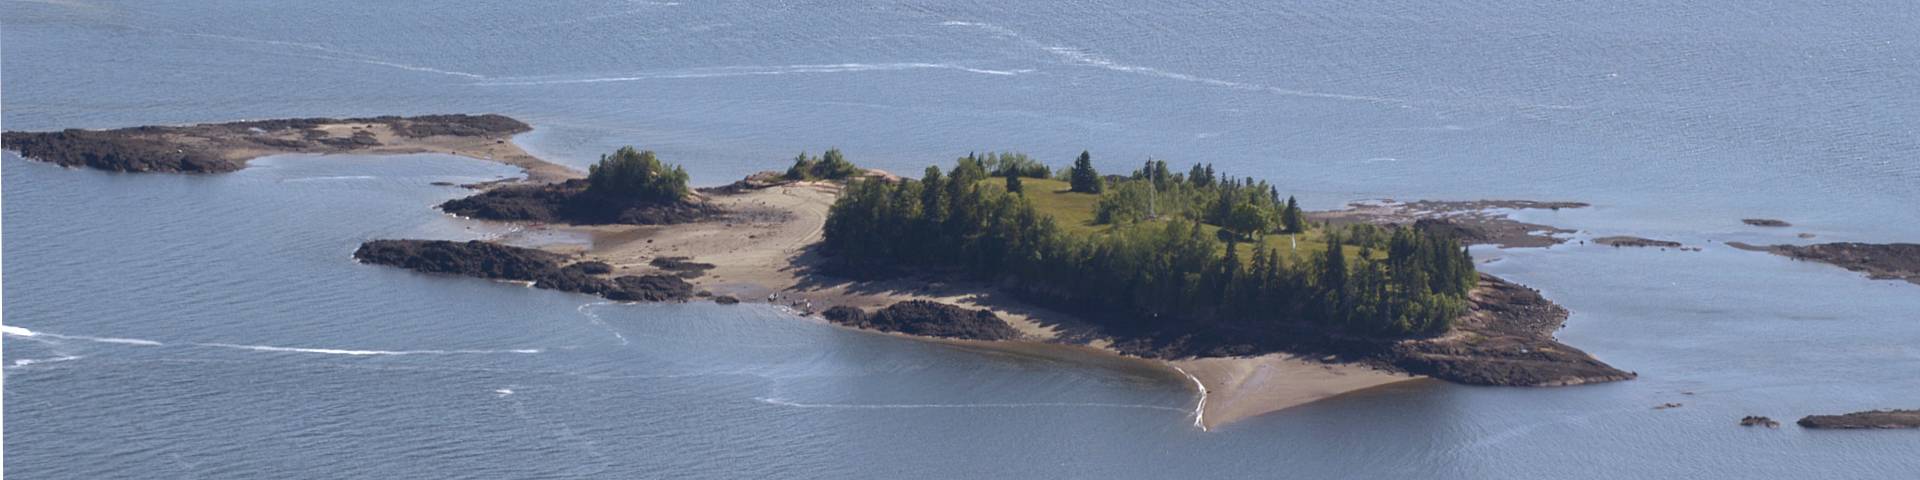 The Saint Croix Island surrounded by water